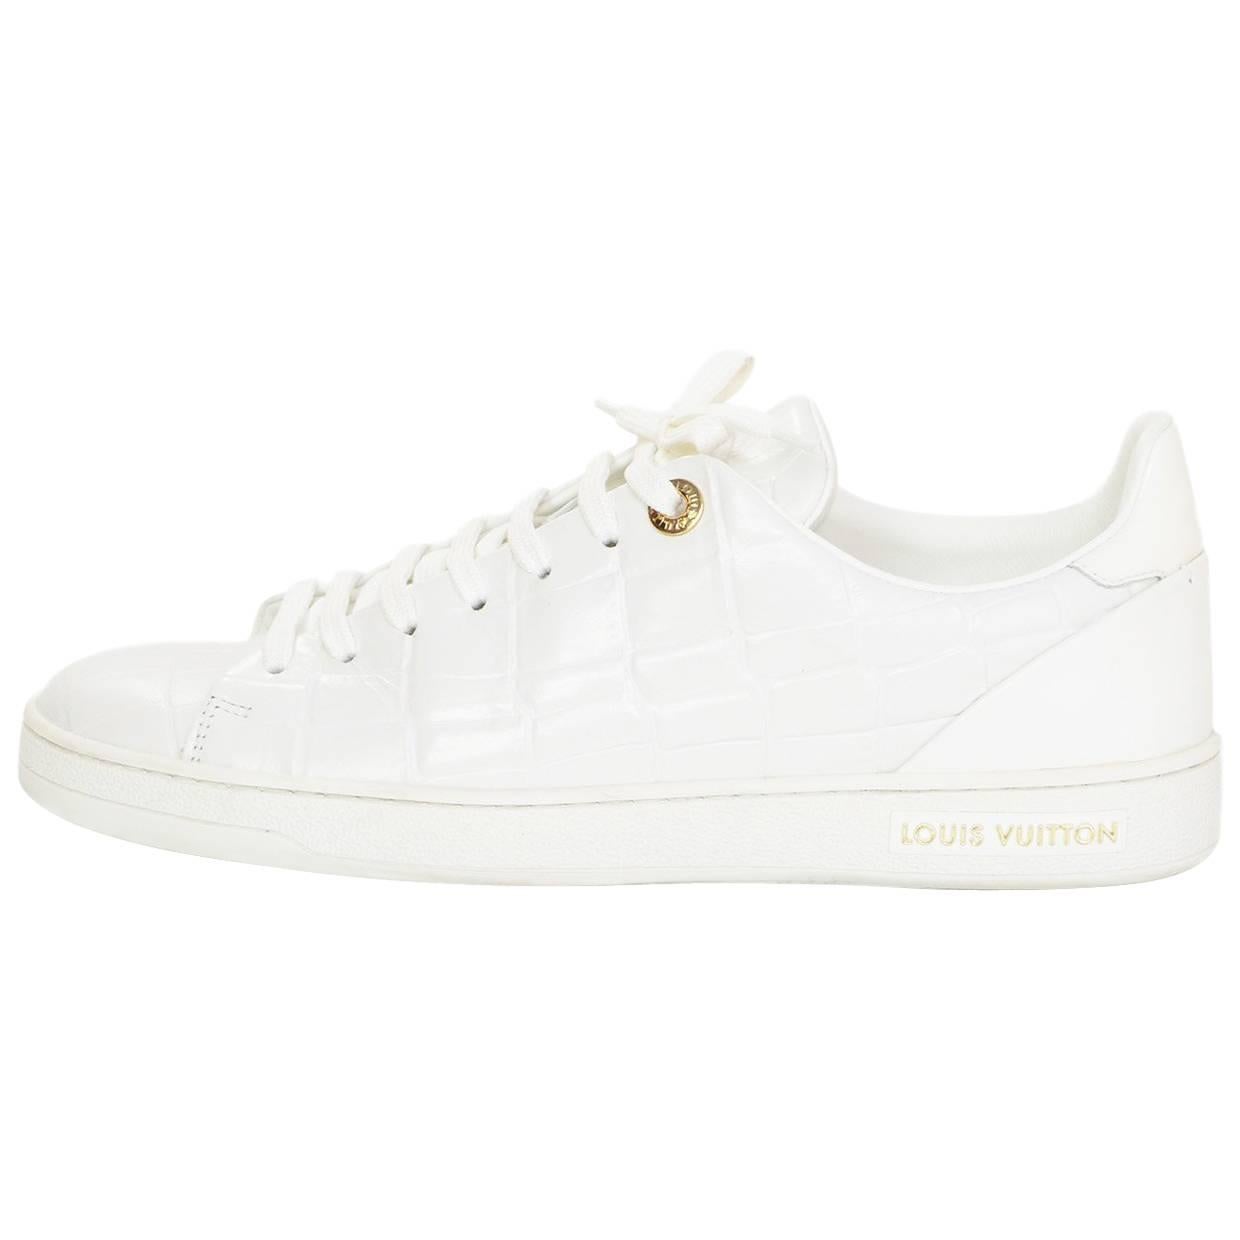 Louis Vuitton White Croc Embossed Leather Frontrow Sneakers Sz 38.5